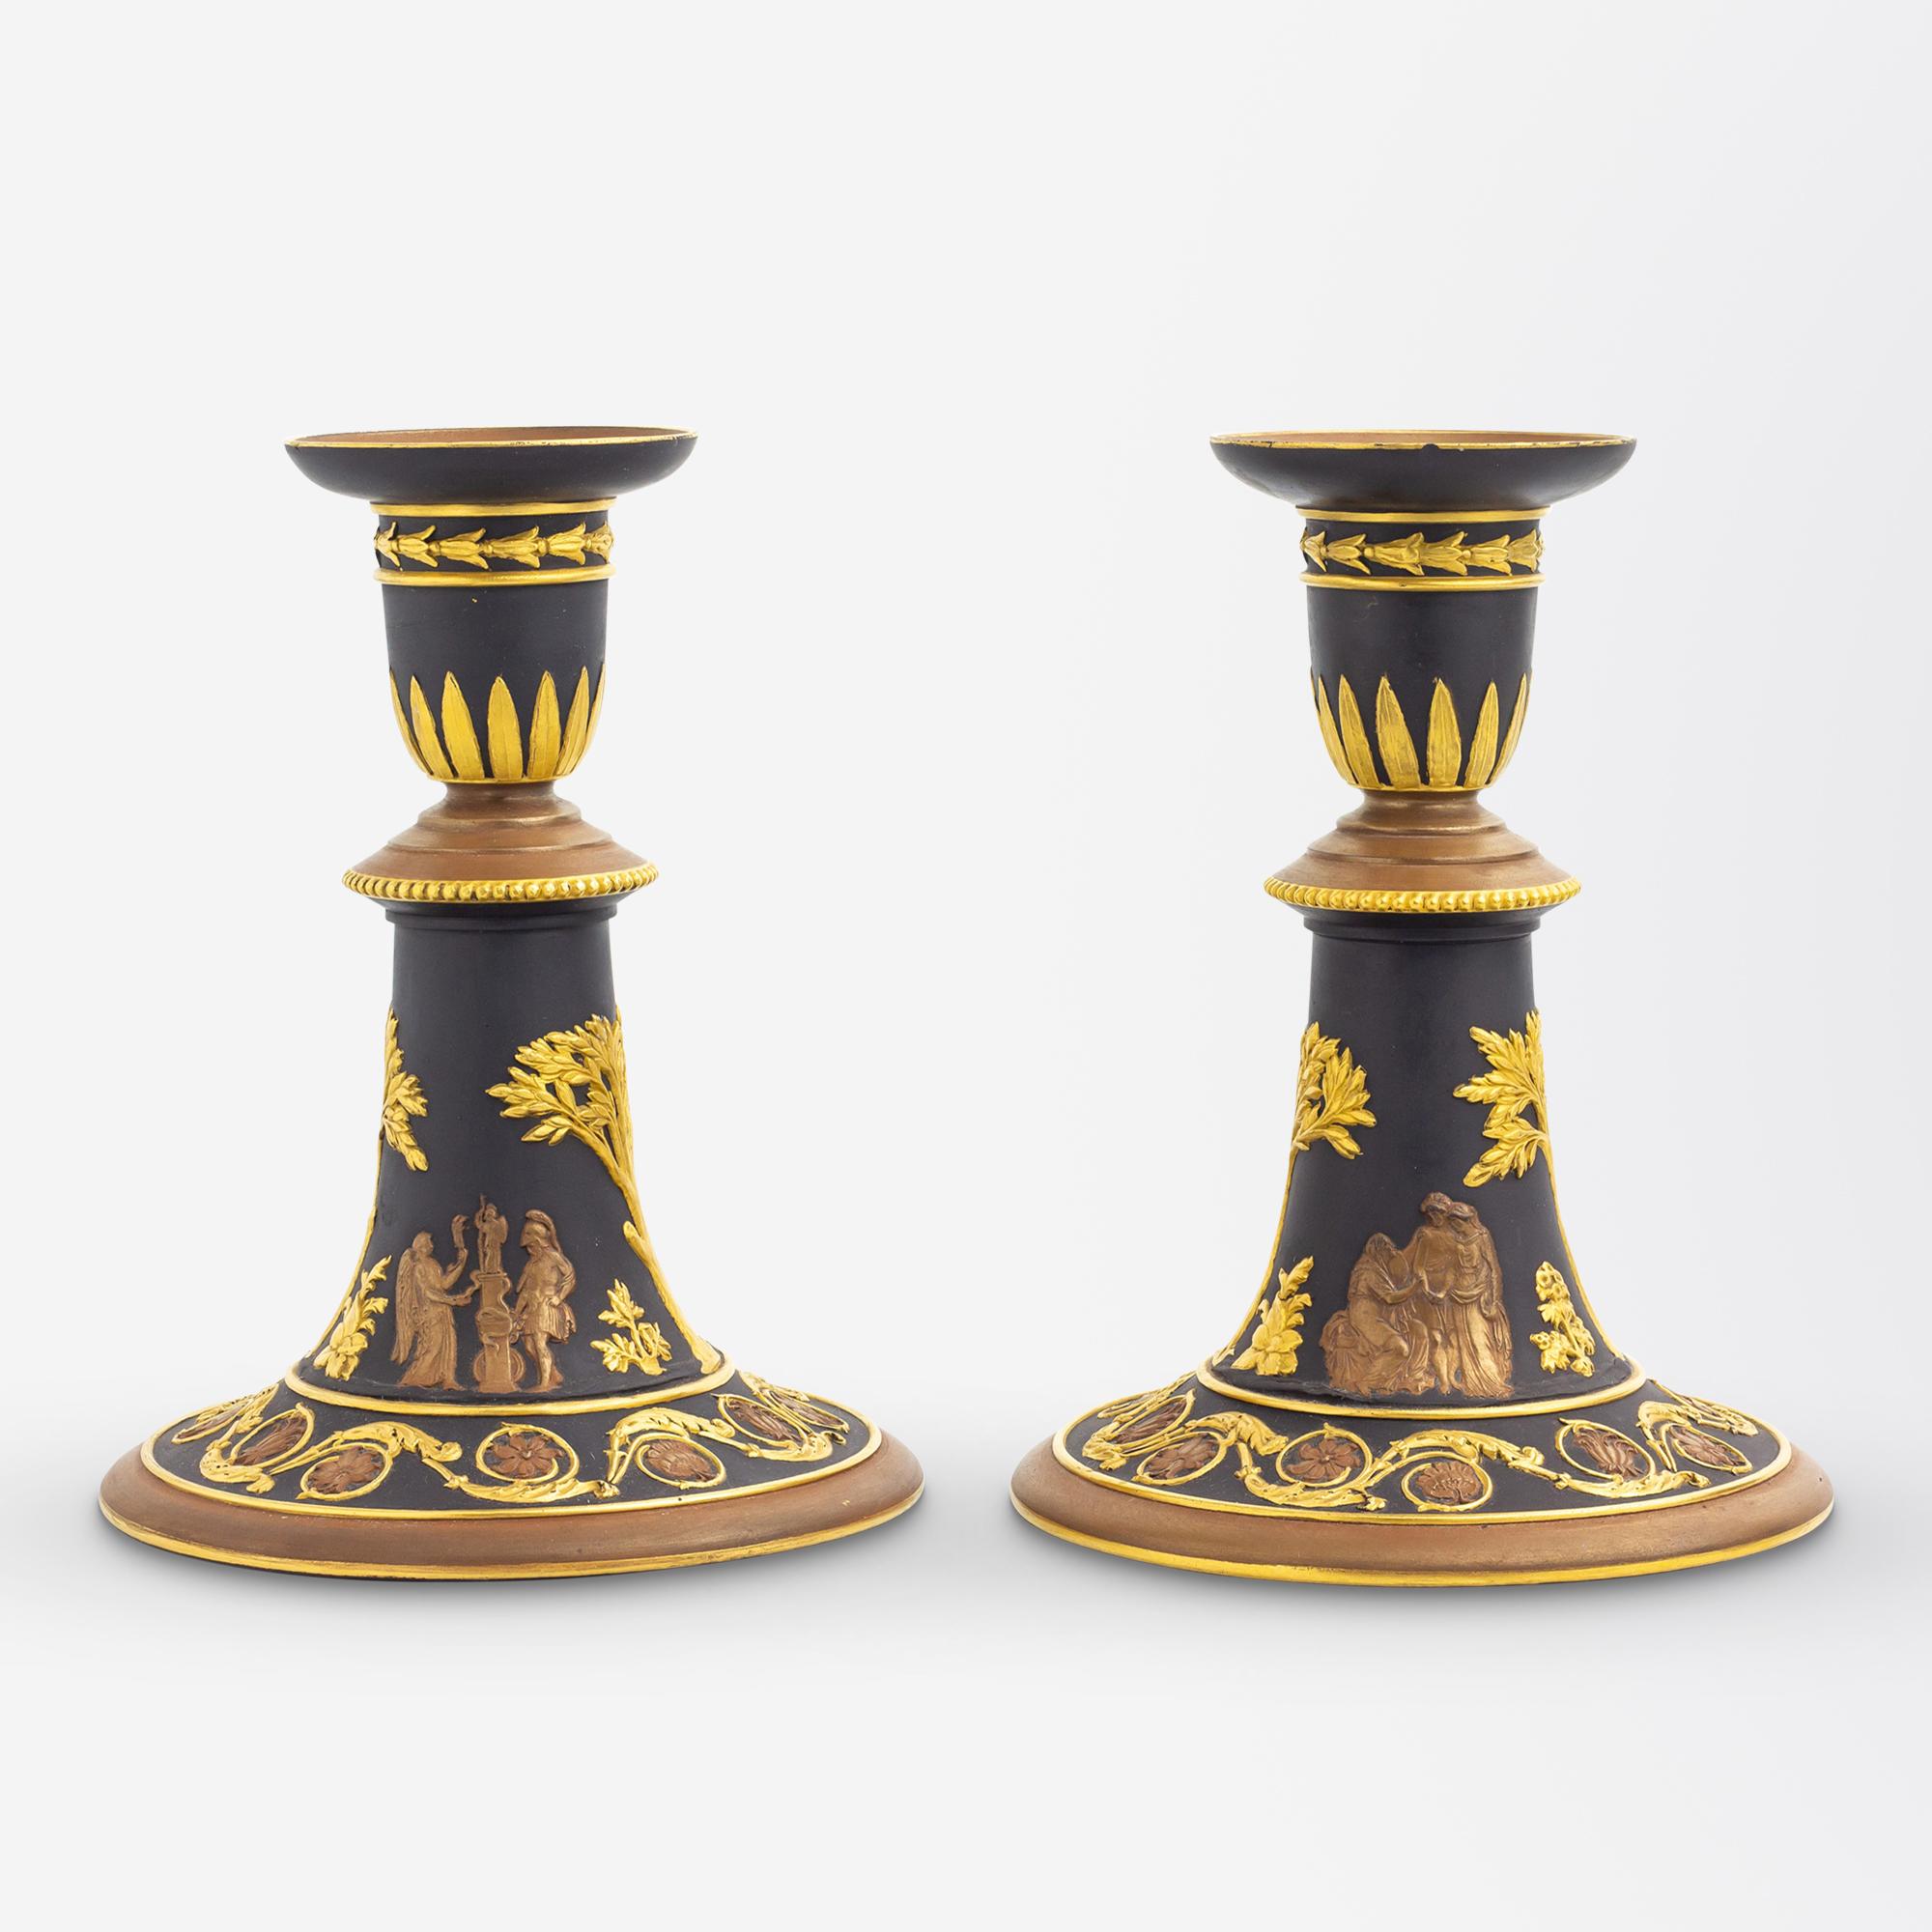 This pair of rare 19th Century candlesticks were made by Wedgwood in their famous 'black basalt'. The pair of candlesticks feature neo-classical motifs which have been parcel gilt and bronzed which is rarely seen with Wedgwood having produced very